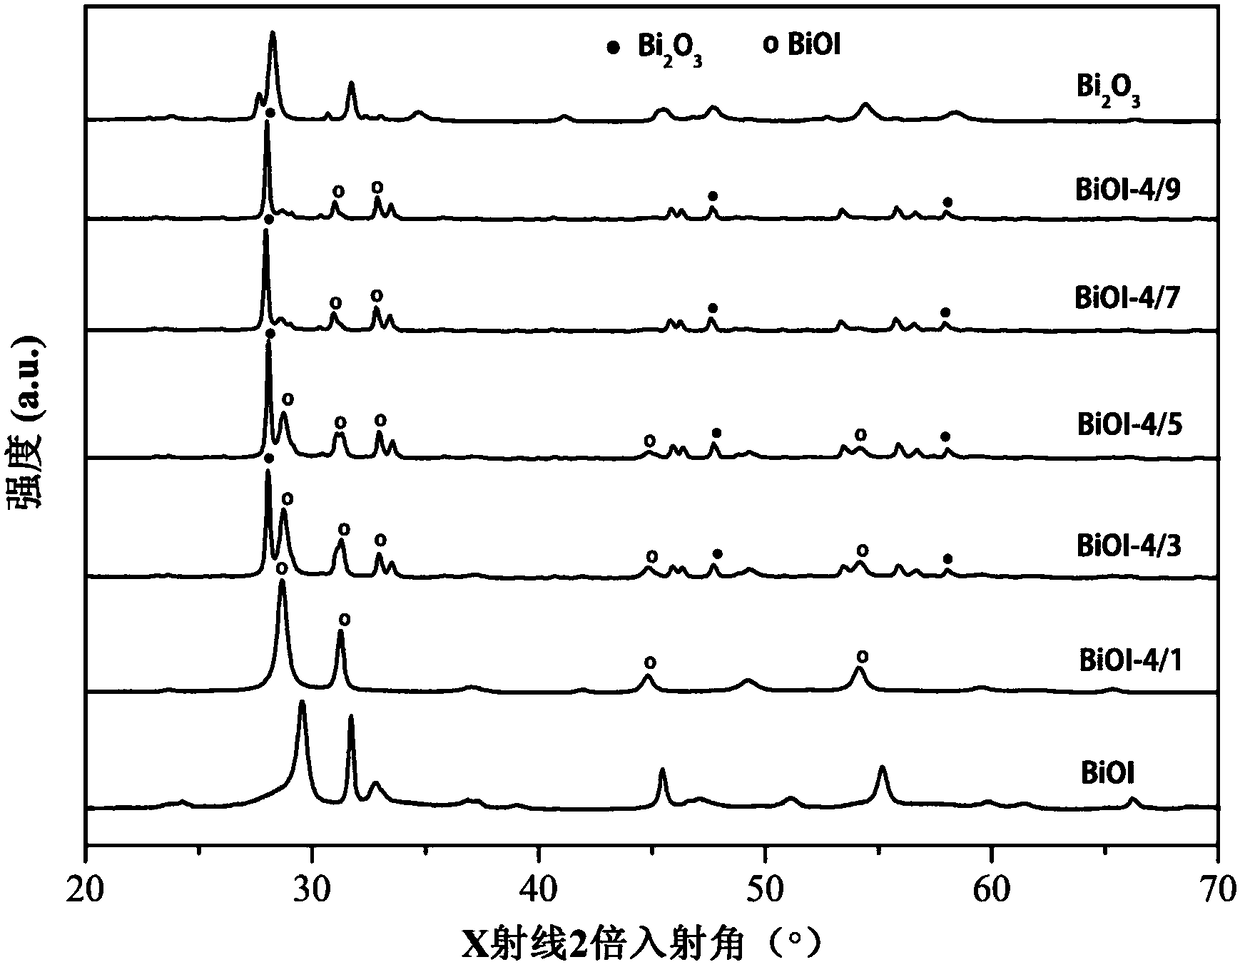 Preparation method of high performance iodine vacancy bismuth oxygen-iodine photocatalytic material and application of high performance iodine vacancy bismuth oxygen-iodine photocatalytic material in treatment of toxic organic wastewater